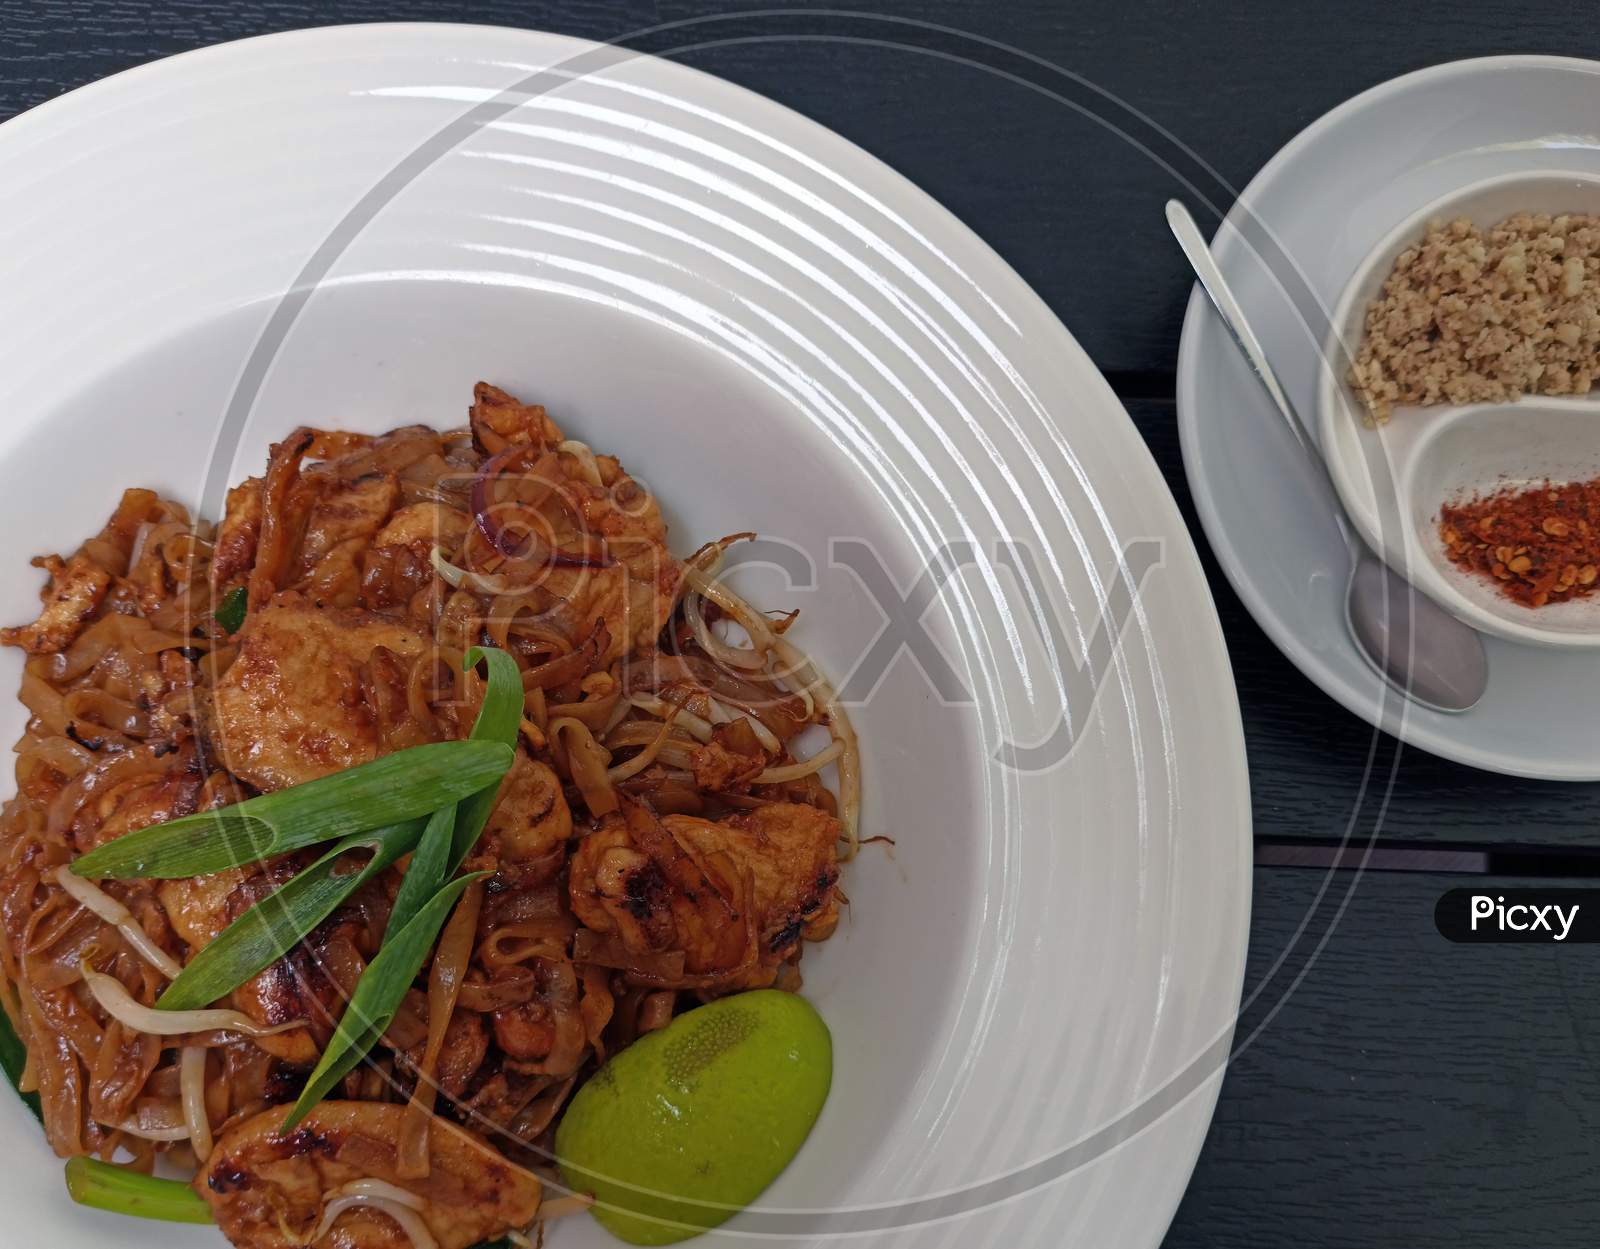 Pad Thai Noodles With Fried Chicken, Mixed Green Leaves, Chopped Peanuts, Shallots & Lime Wedge On White Plate Against Wooden Background Served Hot With Spices And Chillies